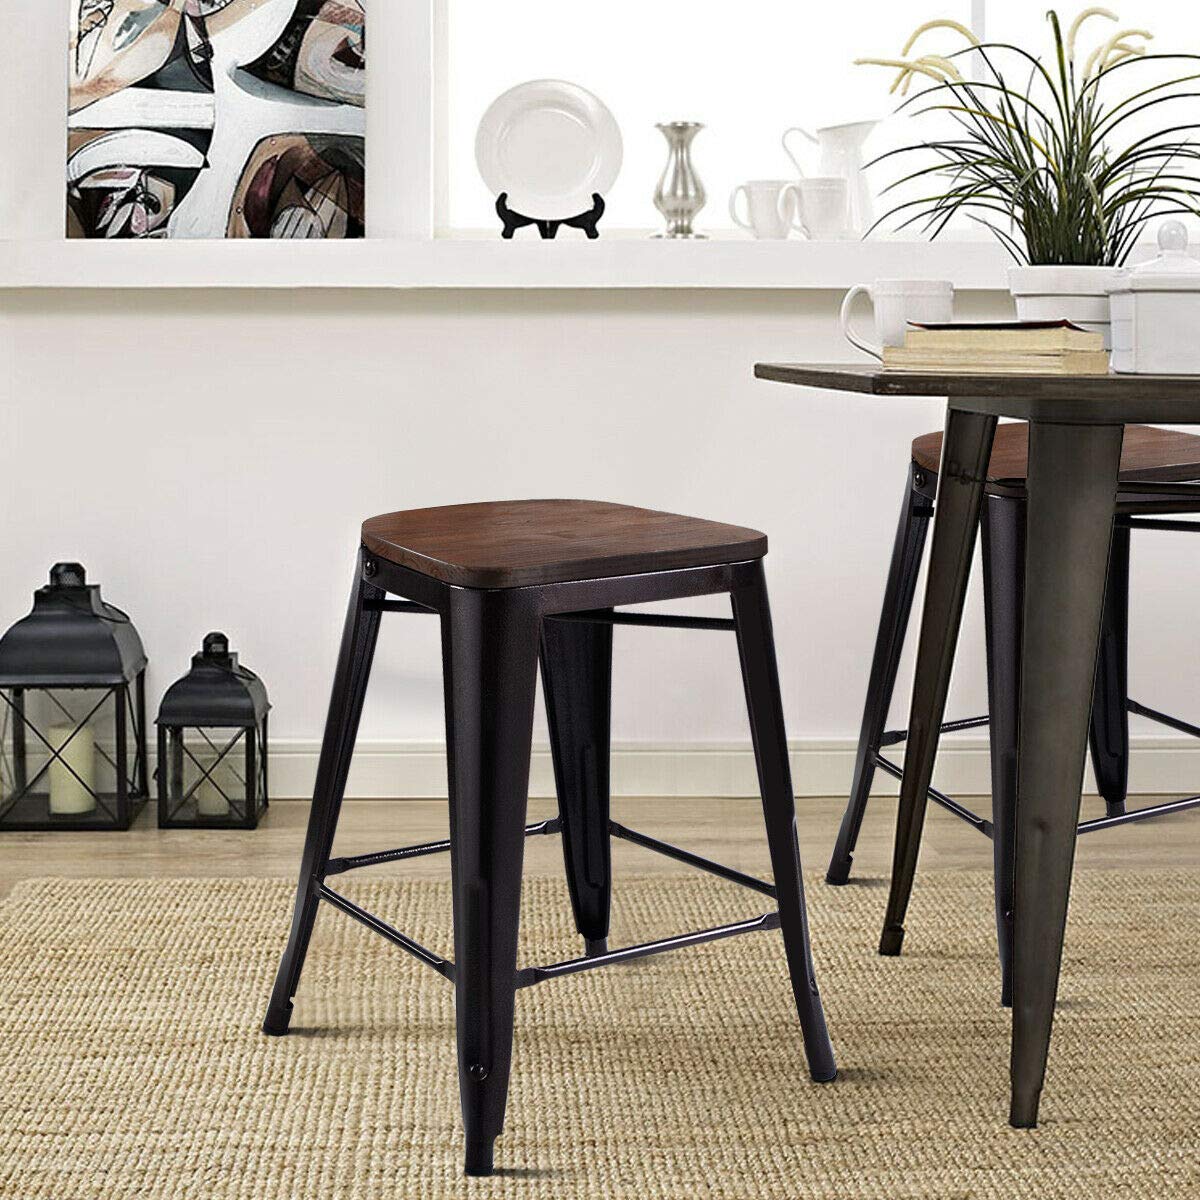 Giantex Tolix Style Dining Stools with Wood Seat and Backrest, Industrial Metal Counter Height Stool